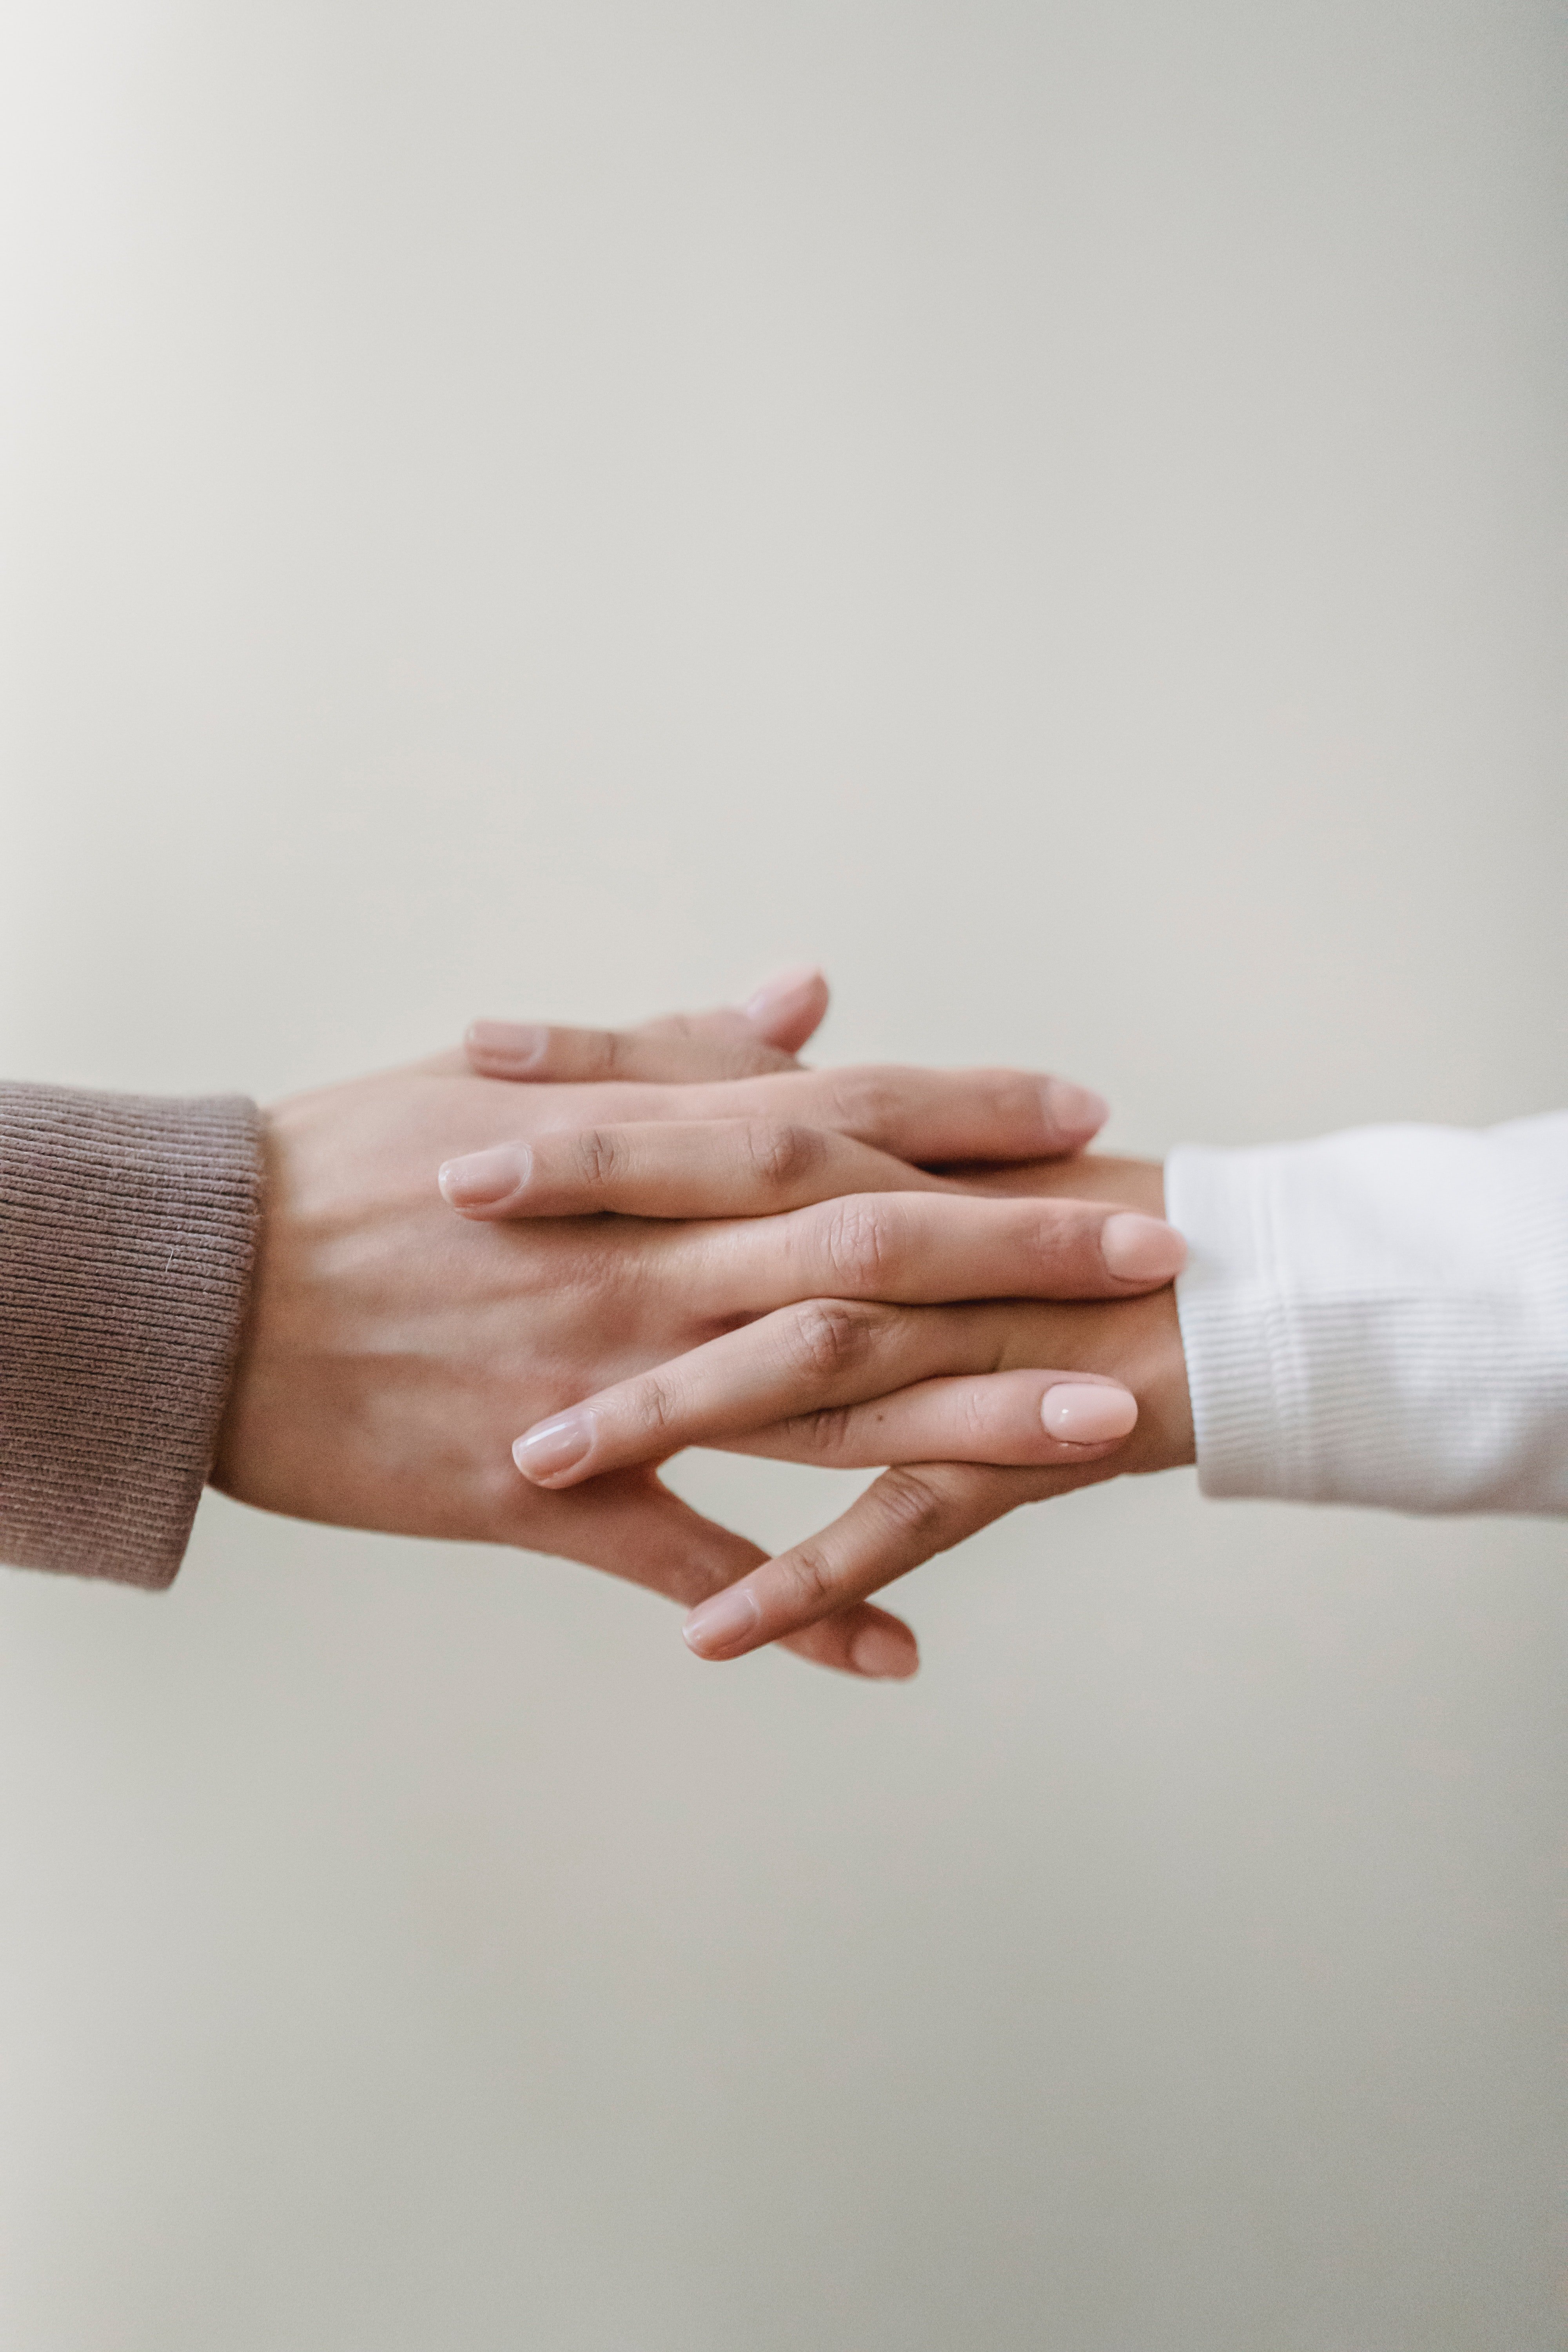 Two people with intertwined hands. | Photo: Pexels/Liza Summer